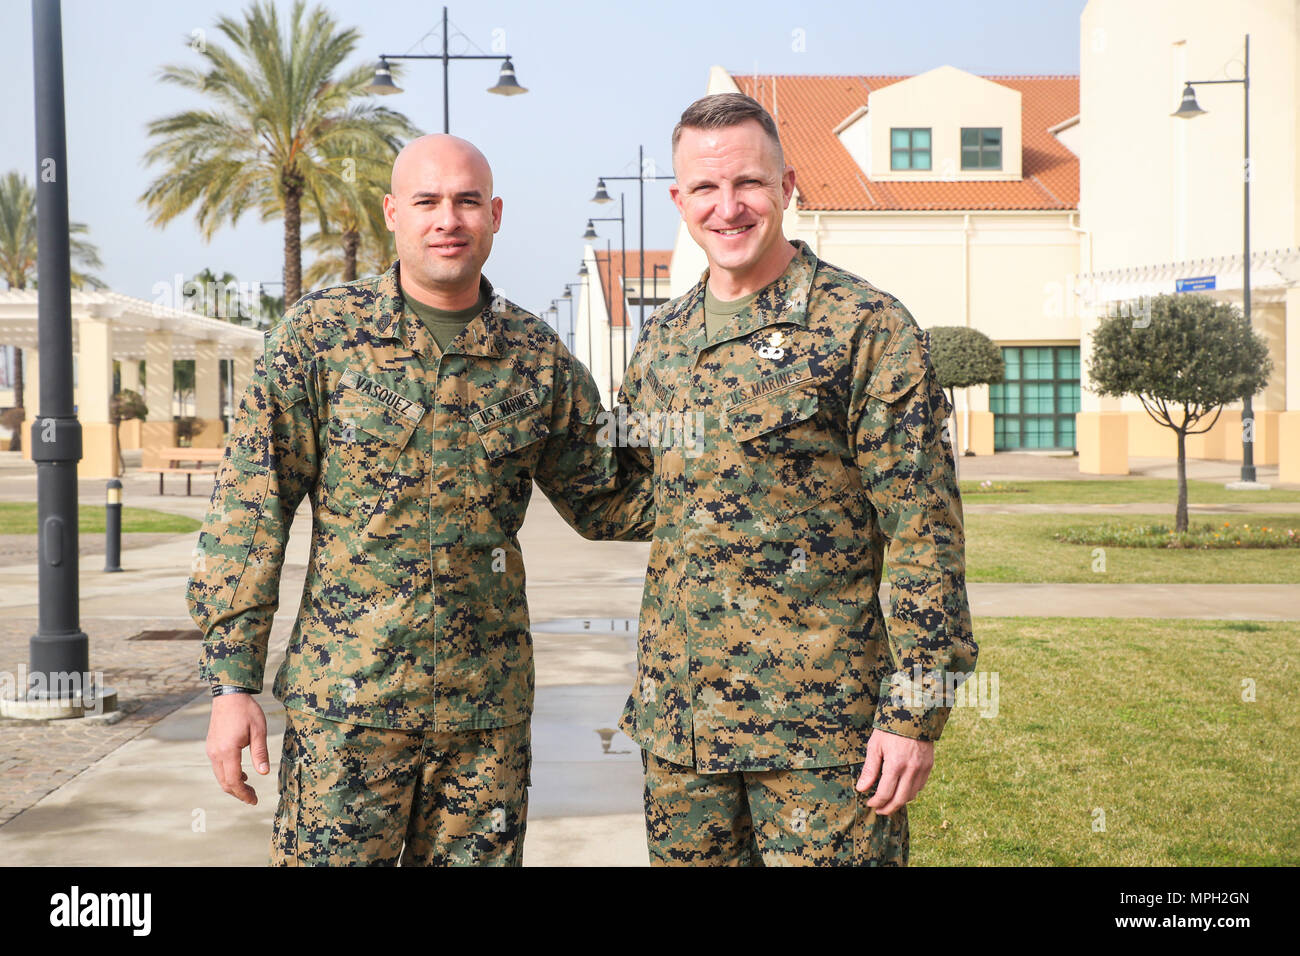 Gunnery Sgt. Juan Vasquez Jr., left, a U.S. Marine assigned to Special Purpose Marine Air-Ground Task Force – Crisis Response – Africa, poses for a photo with Col. Daniel Greenwood, the commanding officer of SPMAGTF-CR-AF, at Naval Air Station Sigonella, Italy, Feb. 25, 2017. Greenwood formerly served as the commanding officer for Marine Corps Recruiting Station Fort Lauderdale, Florida, while Vasquez was a poolee for the station in 2003. (U.S. Marine Corps photo by Cpl. Samuel Guerra) Stock Photo